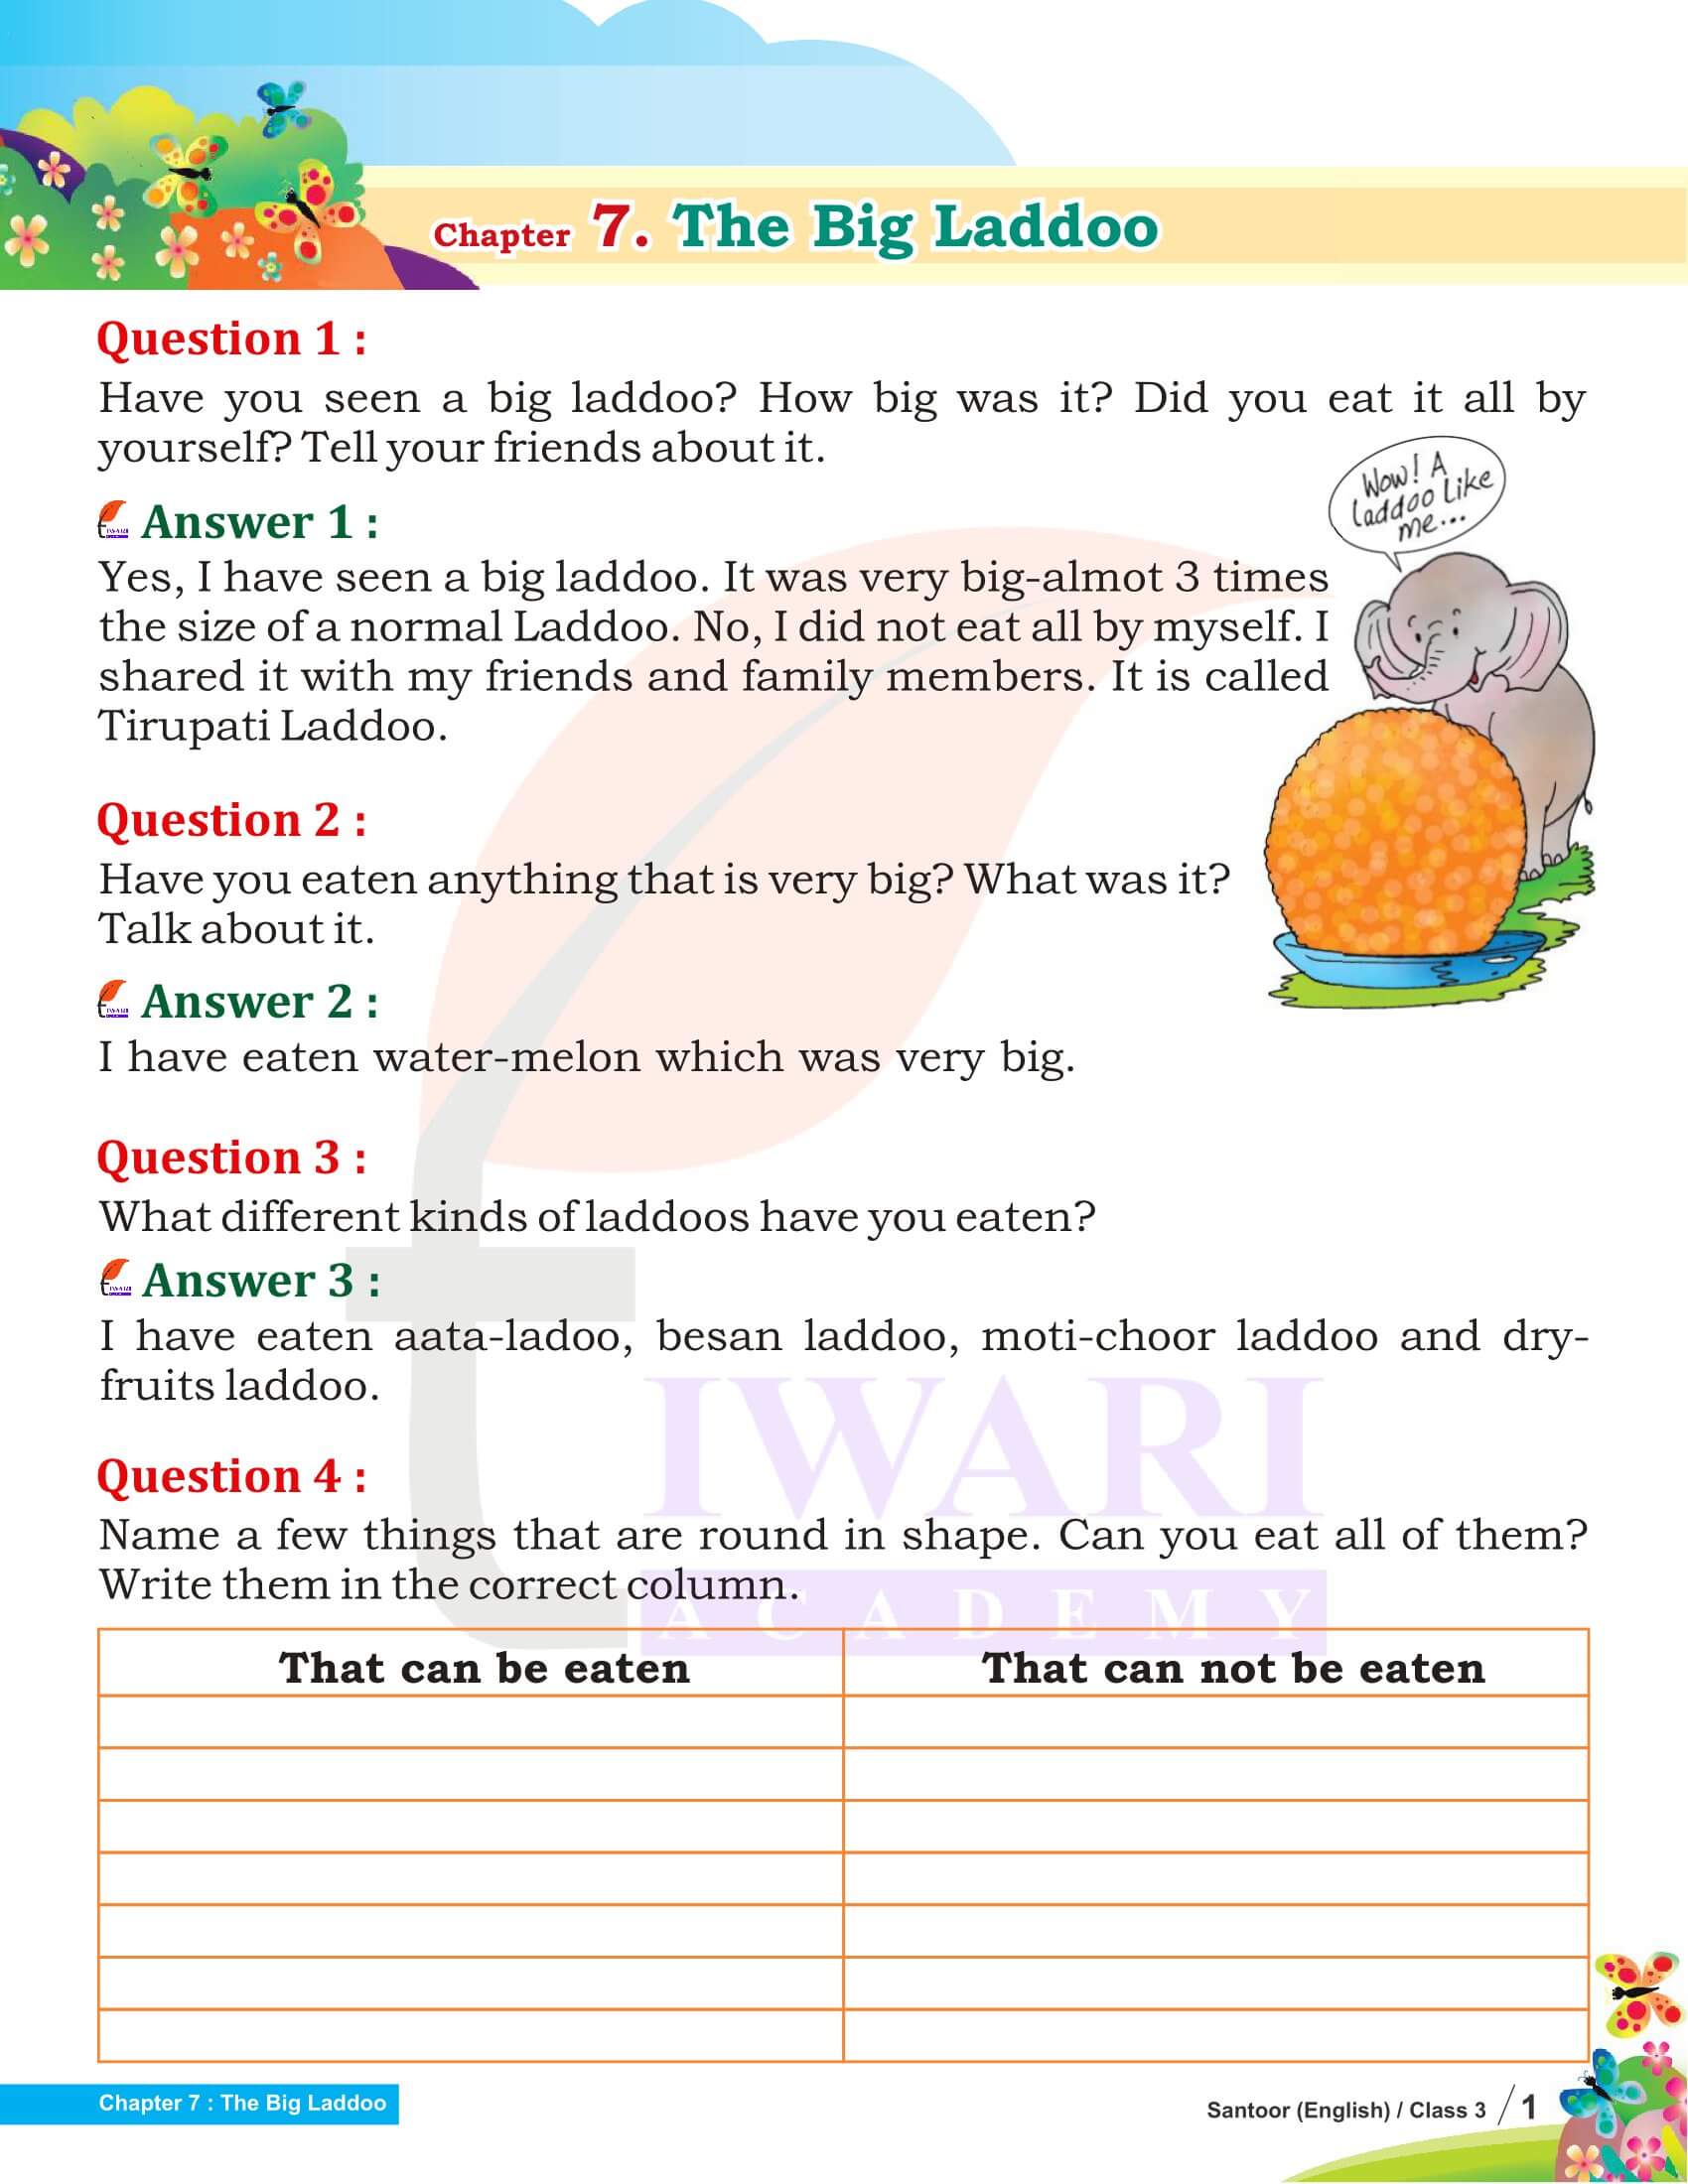 NCERT Solutions for Class 3 English Santoor Chapter 7